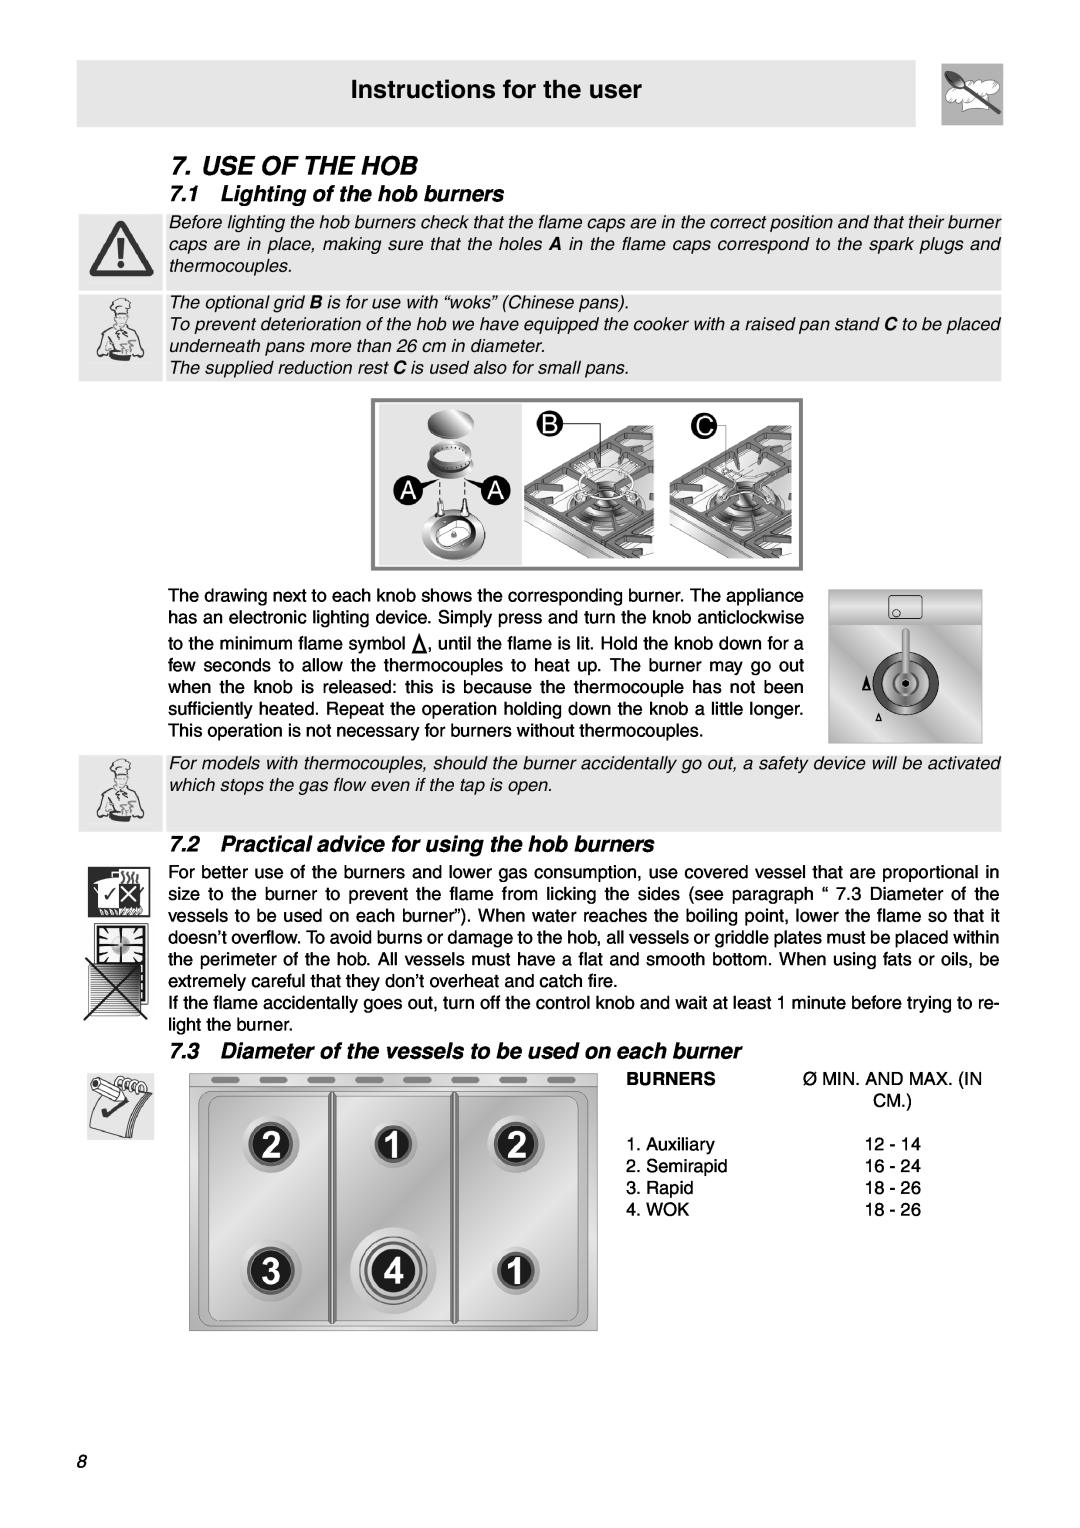 Smeg SNZ106VML manual Use Of The Hob, Lighting of the hob burners, Practical advice for using the hob burners 